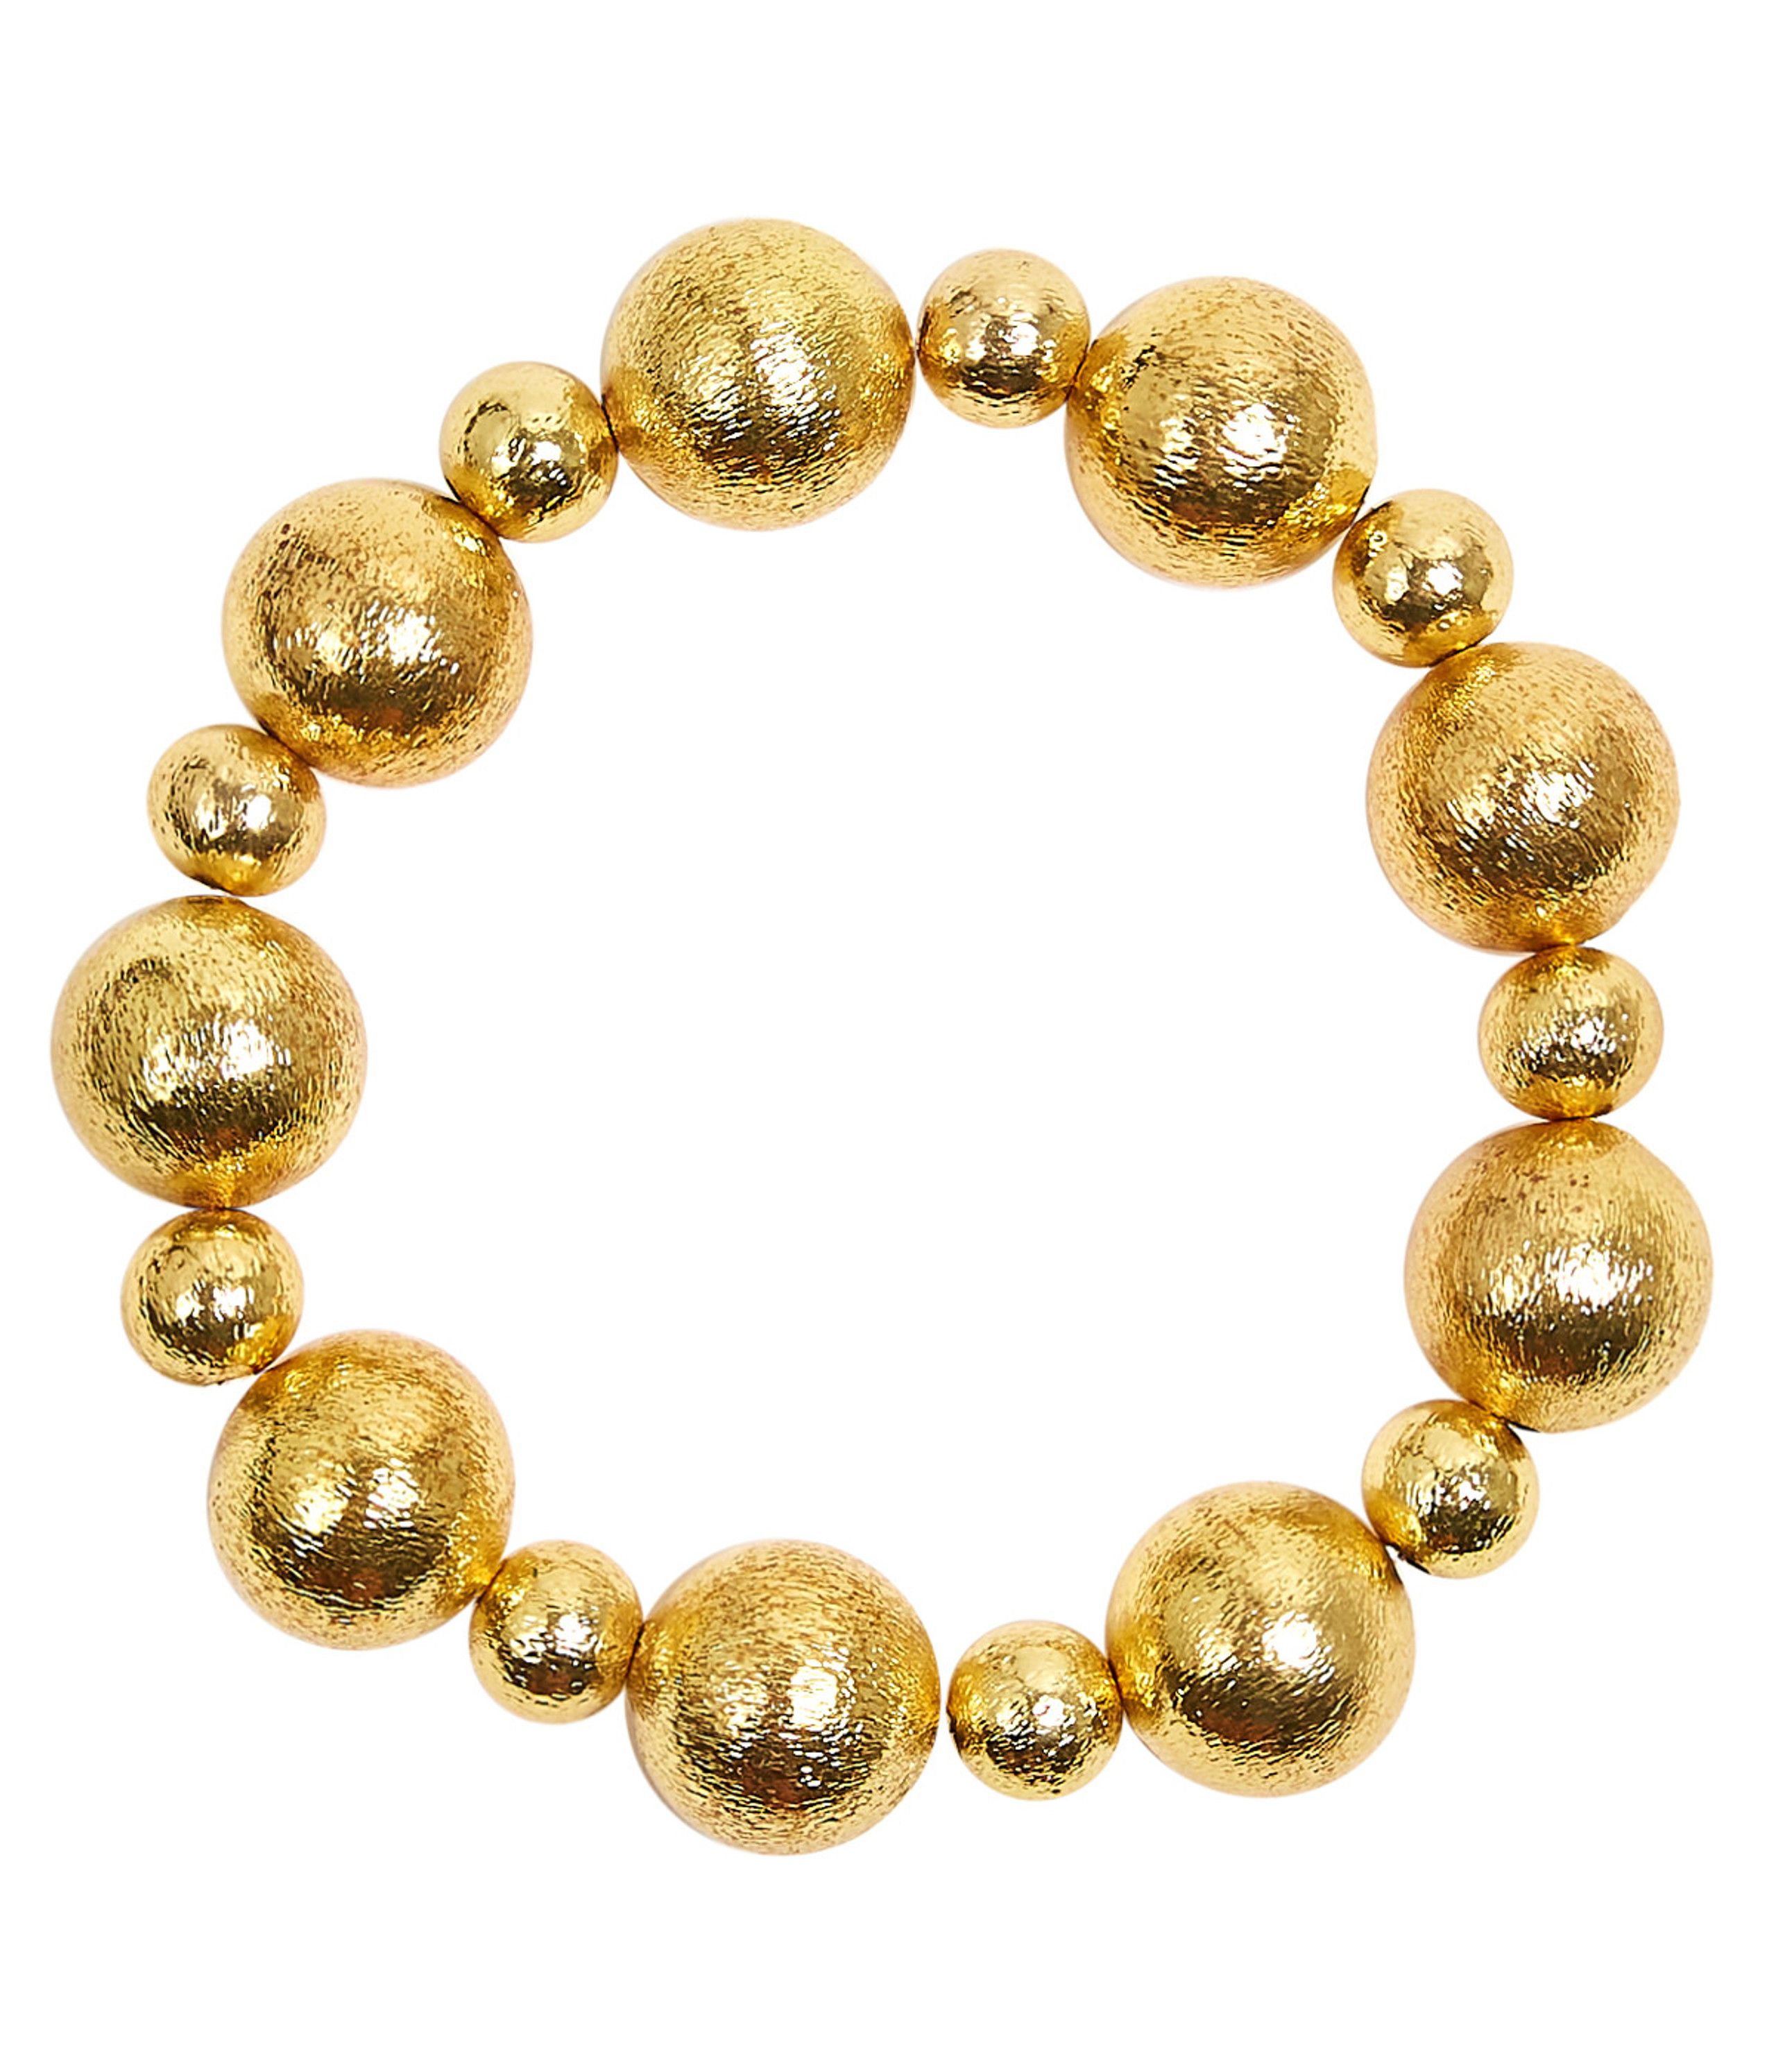 Georgia Bracelet -  large Mixed Beads  14mm and 6mm beads | Lisi Lerch Inc